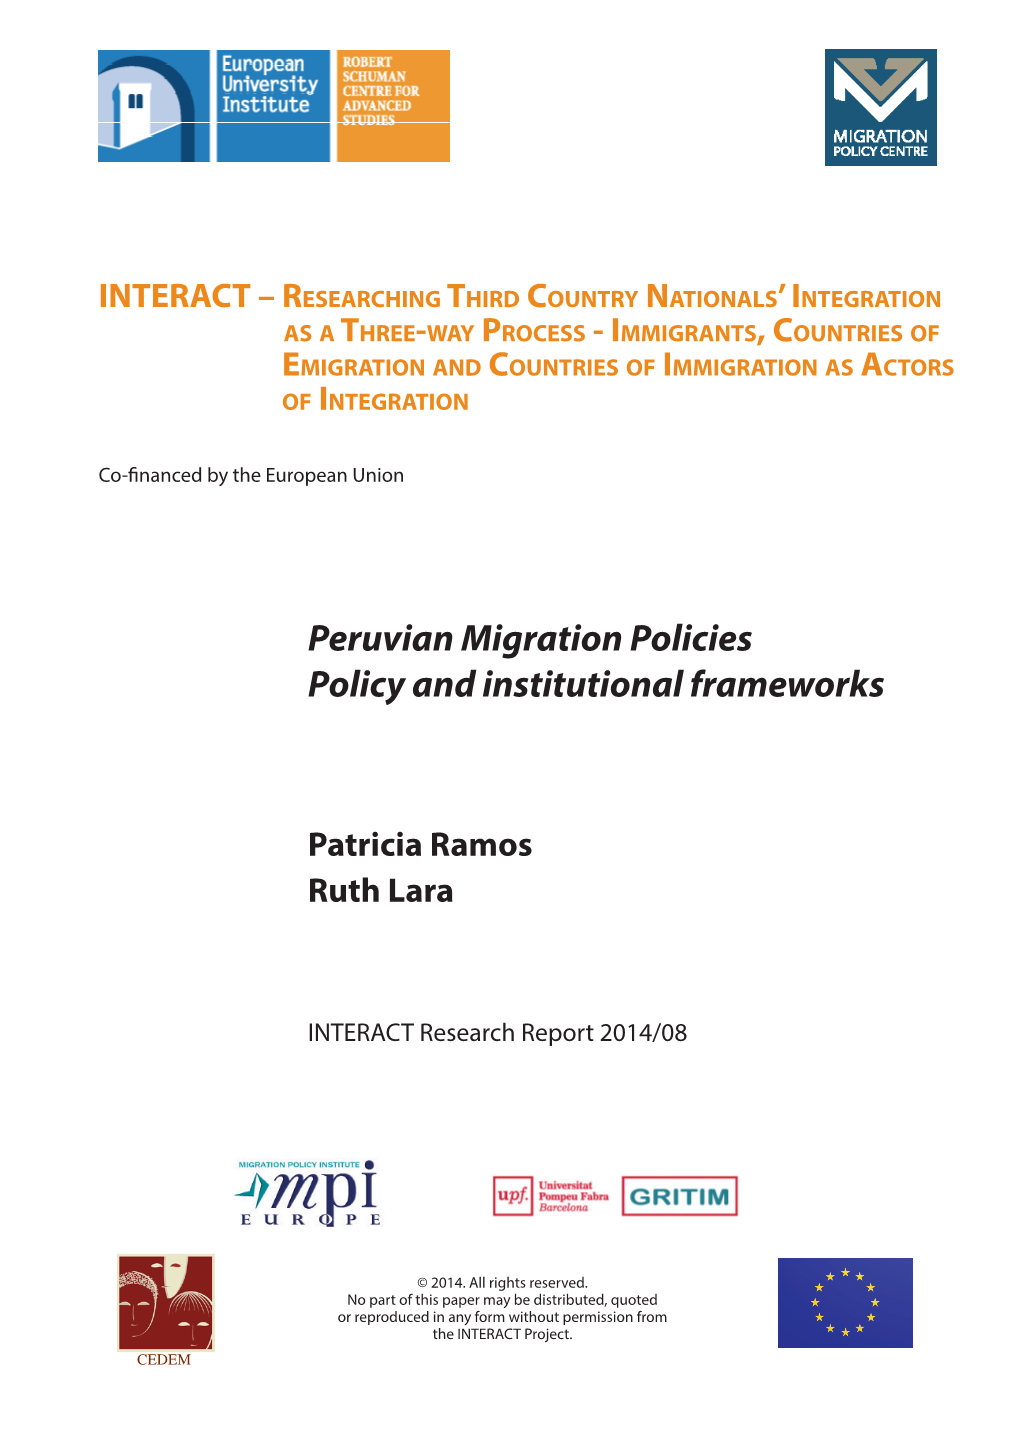 Peruvian Migration Policies Policy and Institutional Frameworks